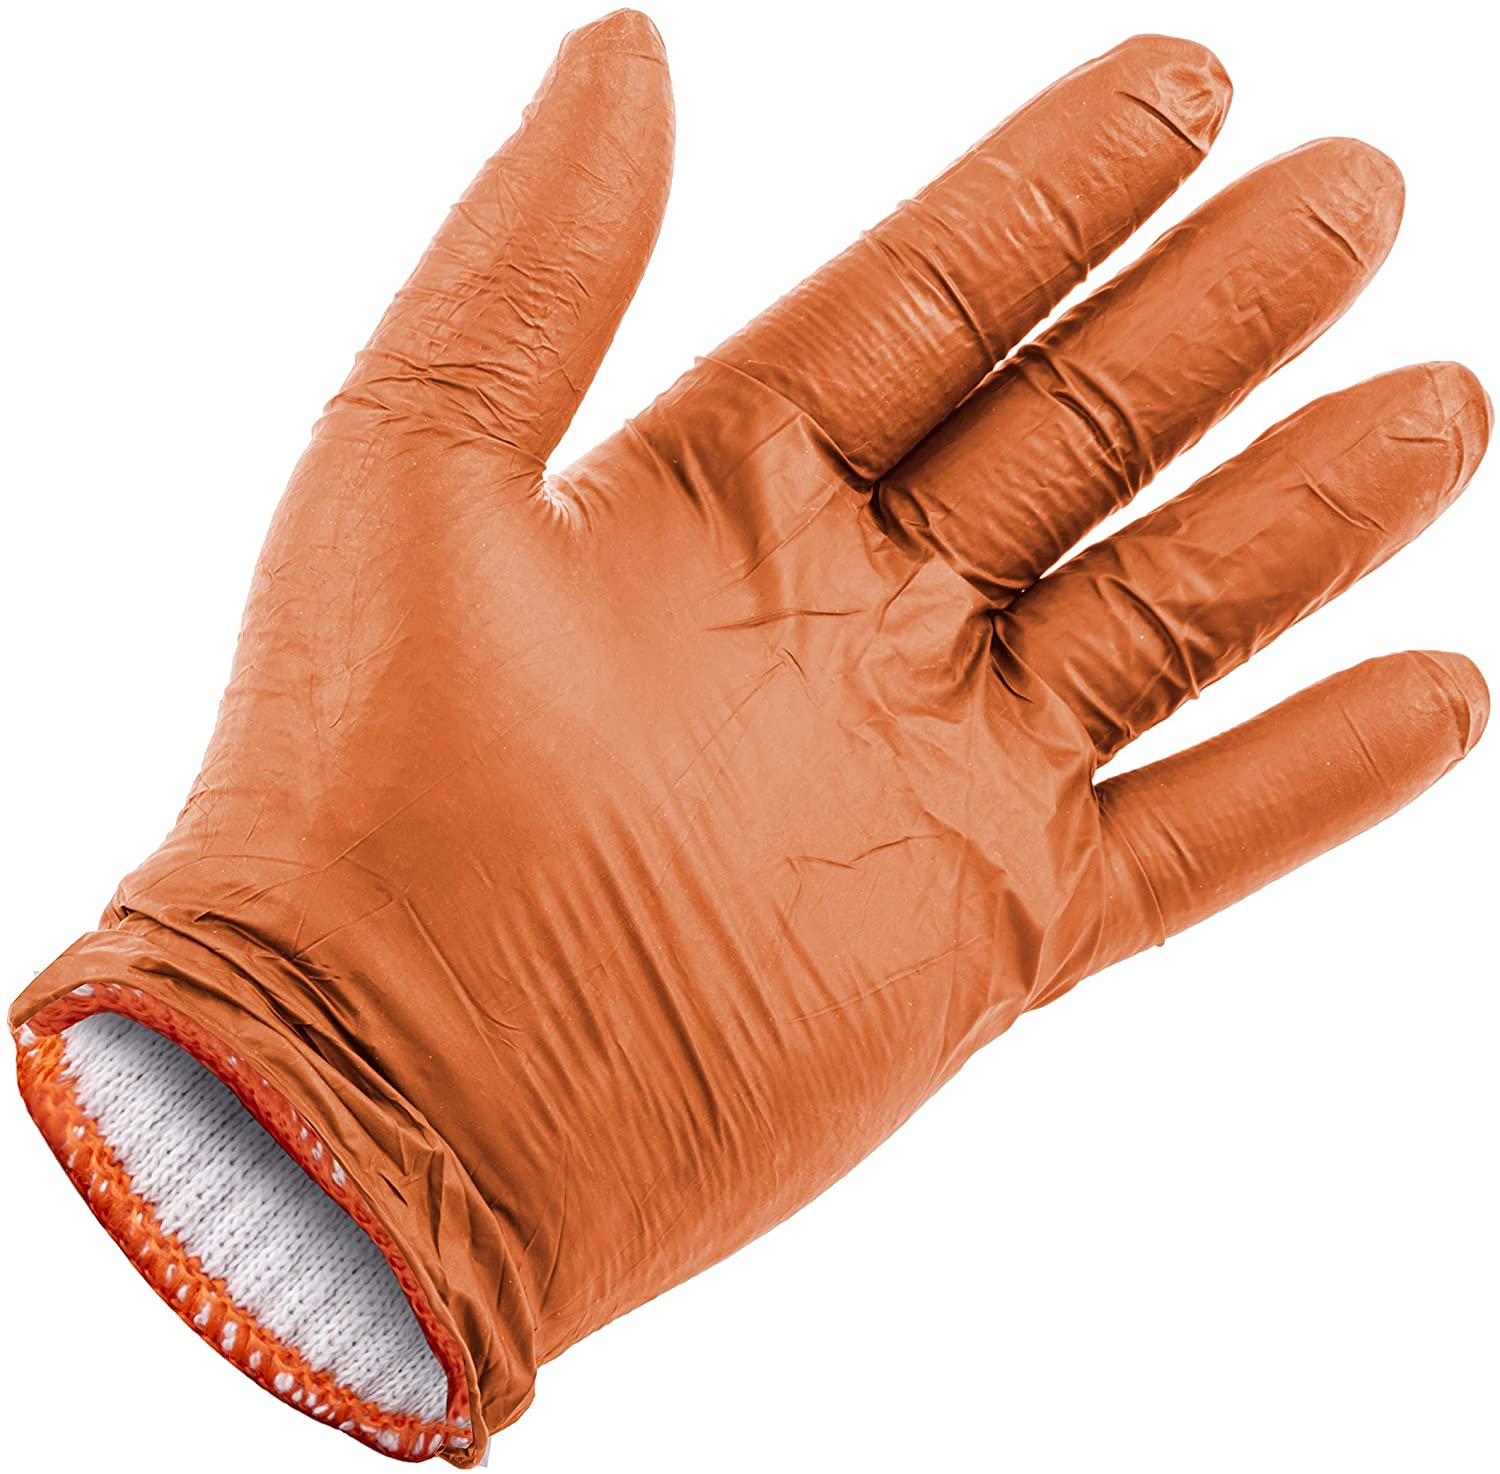  KITCHEN PERFECTION Silicone Smoker Oven Gloves -Extreme Heat  Resistant BBQ Gloves -Handle Hot Food Right on Your Grill Fryer  Pit, Waterproof Oven Mitts